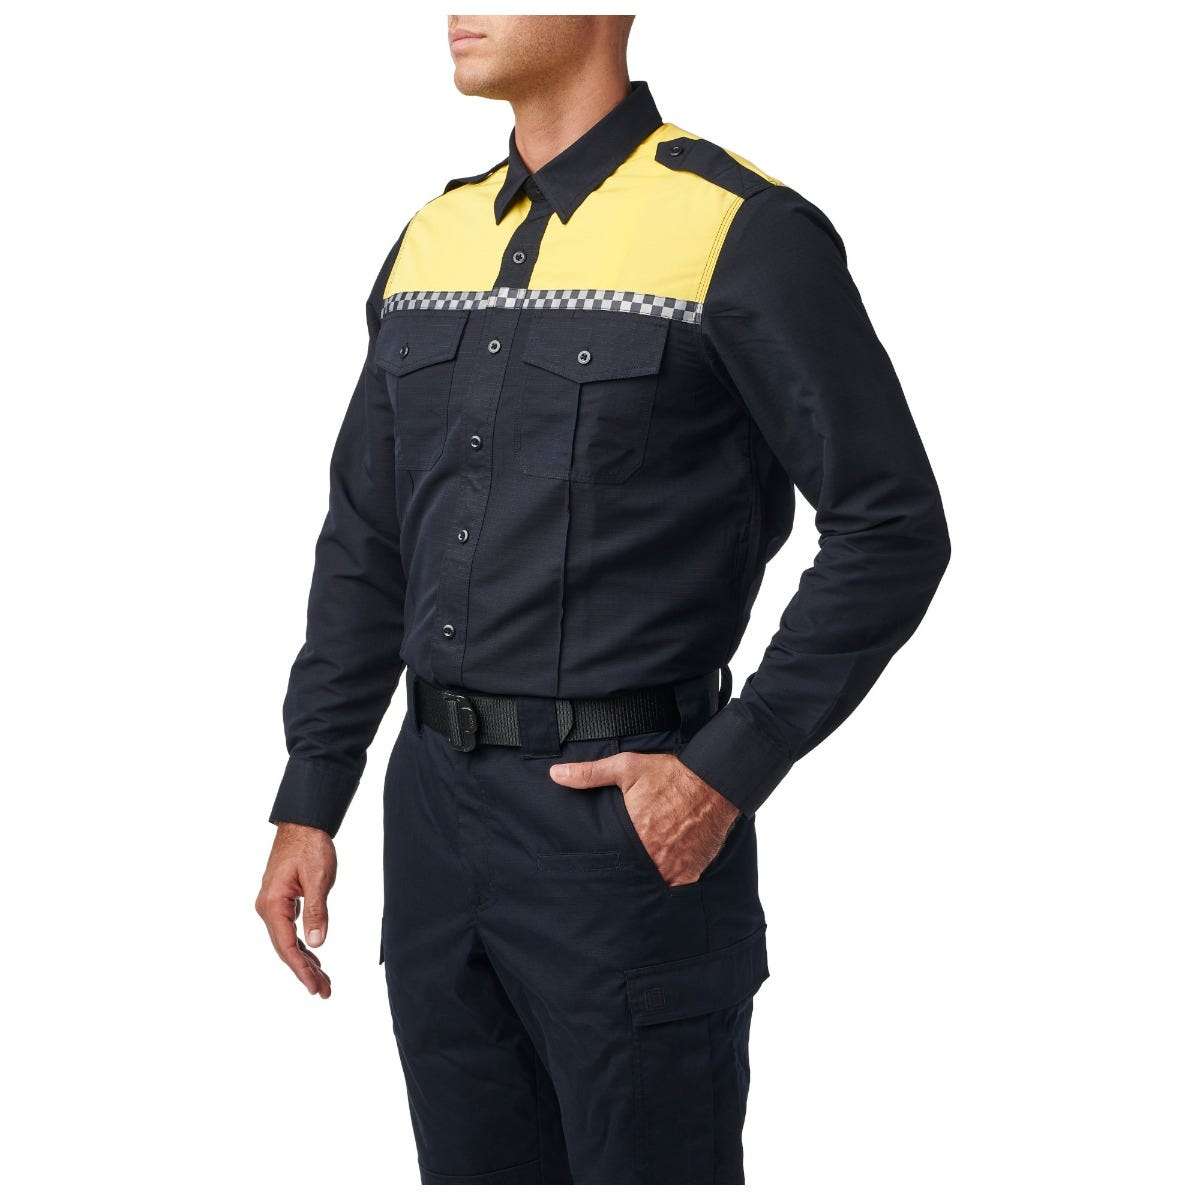 5.11 Tactical Fast-Tac® Uniform Long Sleeve Shirt 72525 - Clothing & Accessories